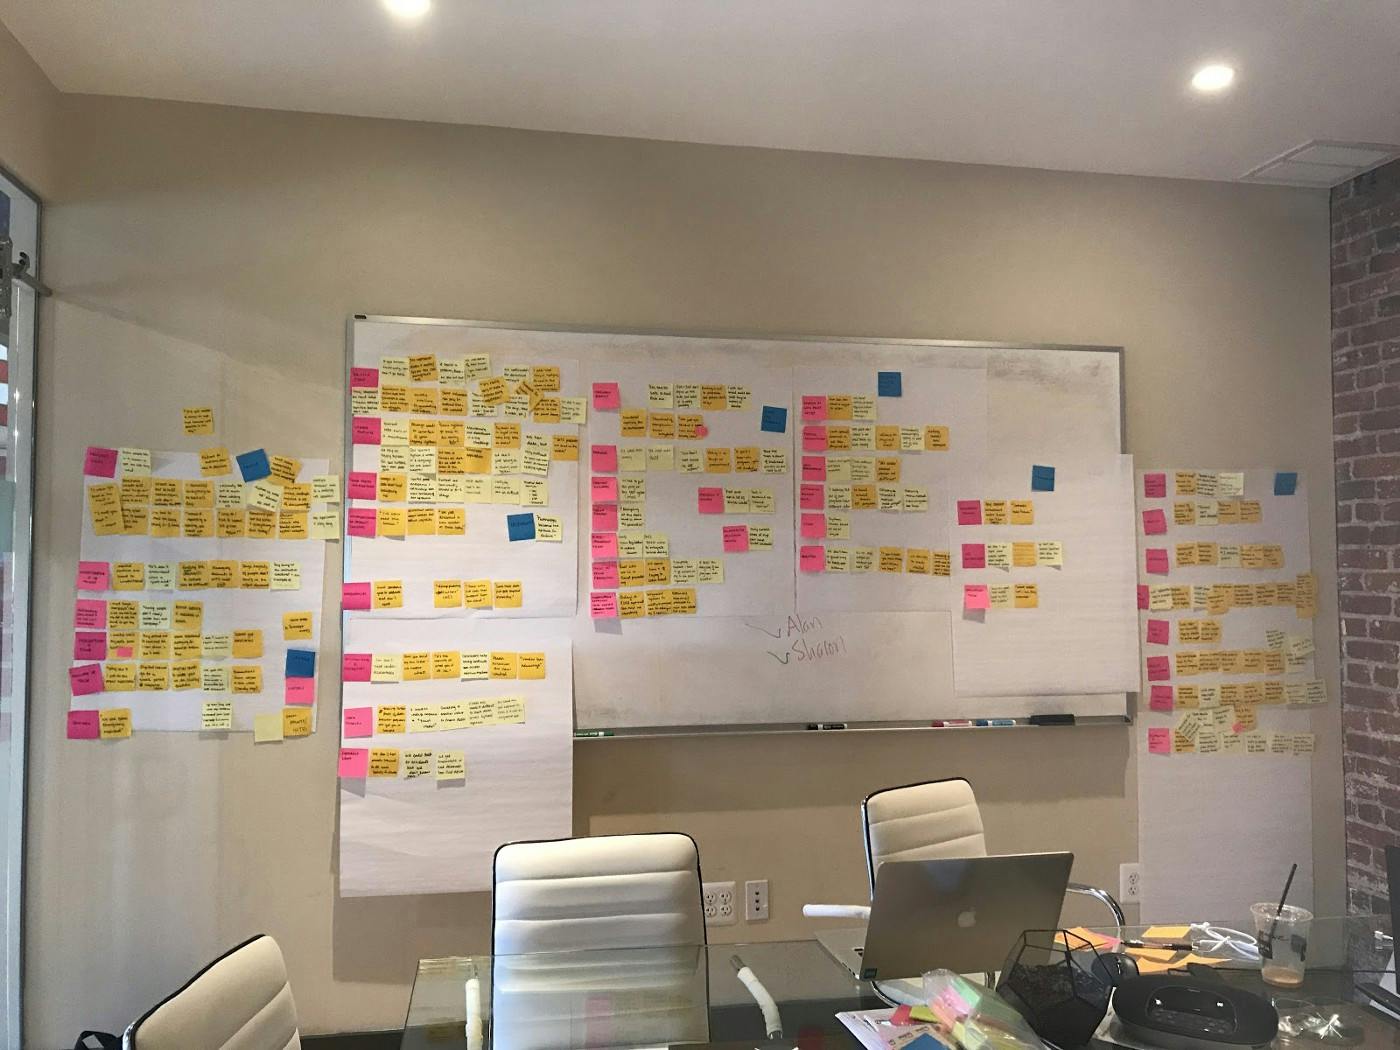 A photo of sticky notes on a whiteboard, organized into rows and columns, in a conference room.